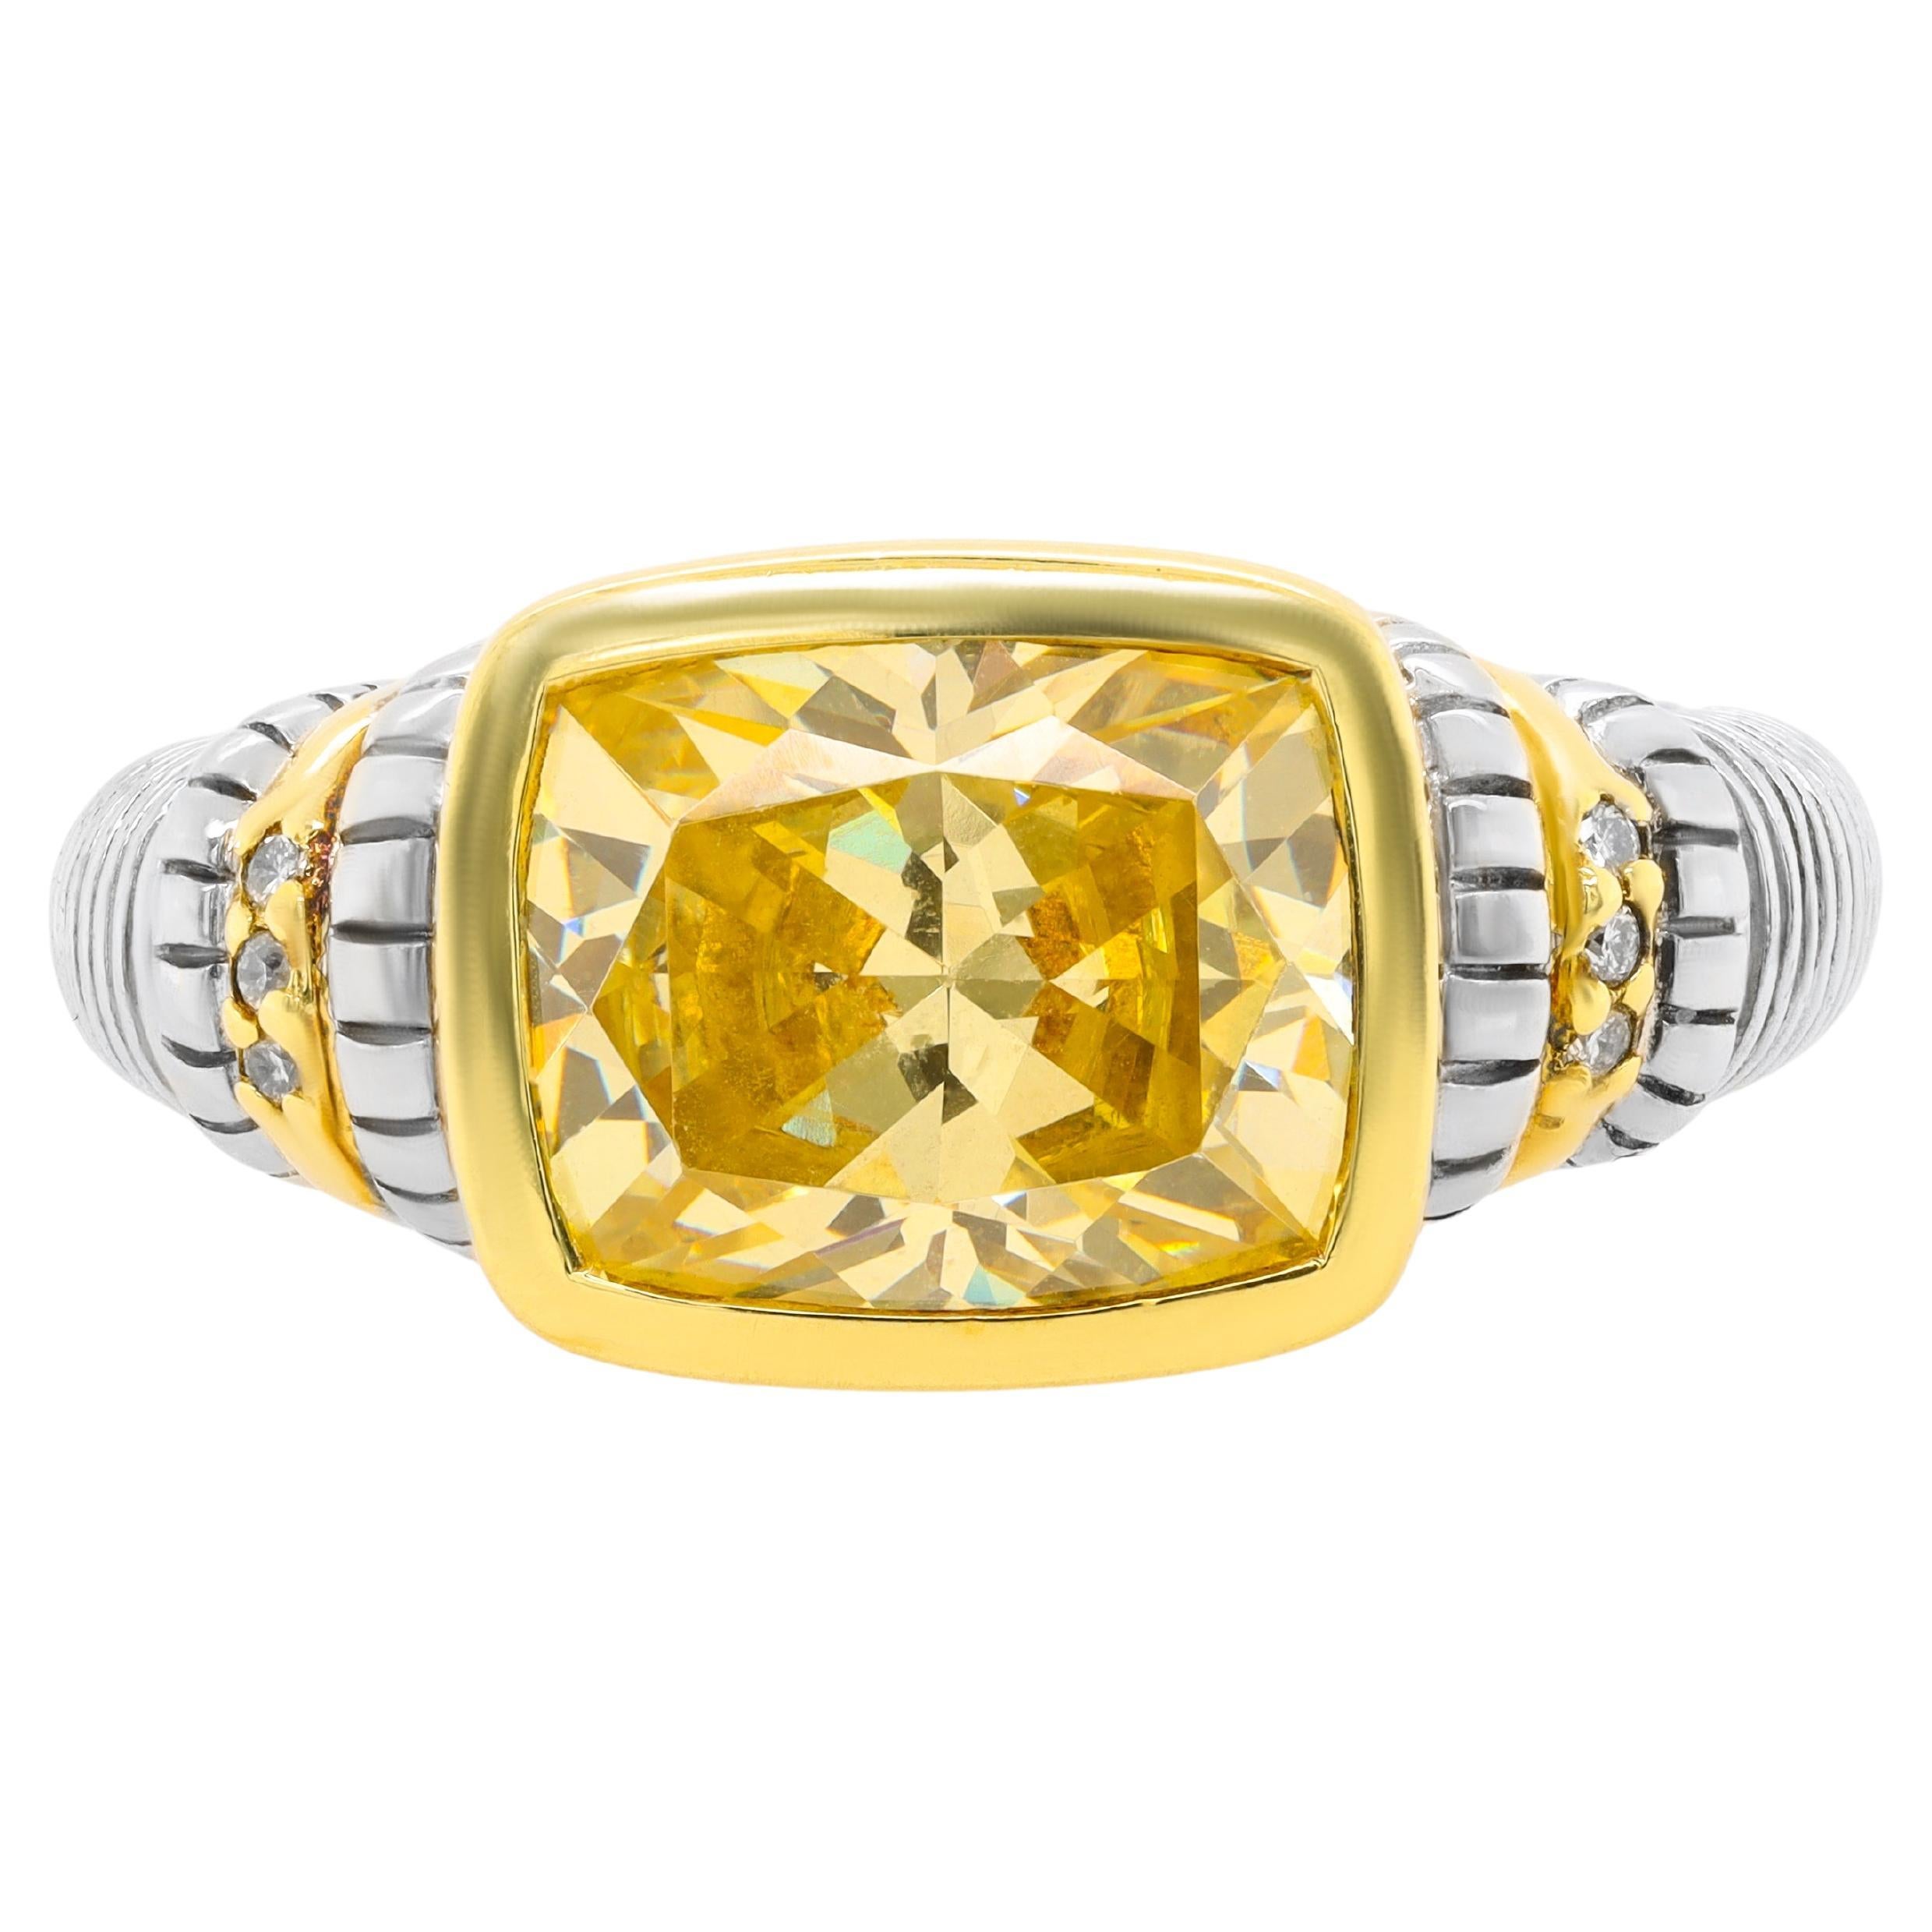 Diana M. Silver and 18 kt yellow gold Judith Ripka style citrine ring with a 4.2